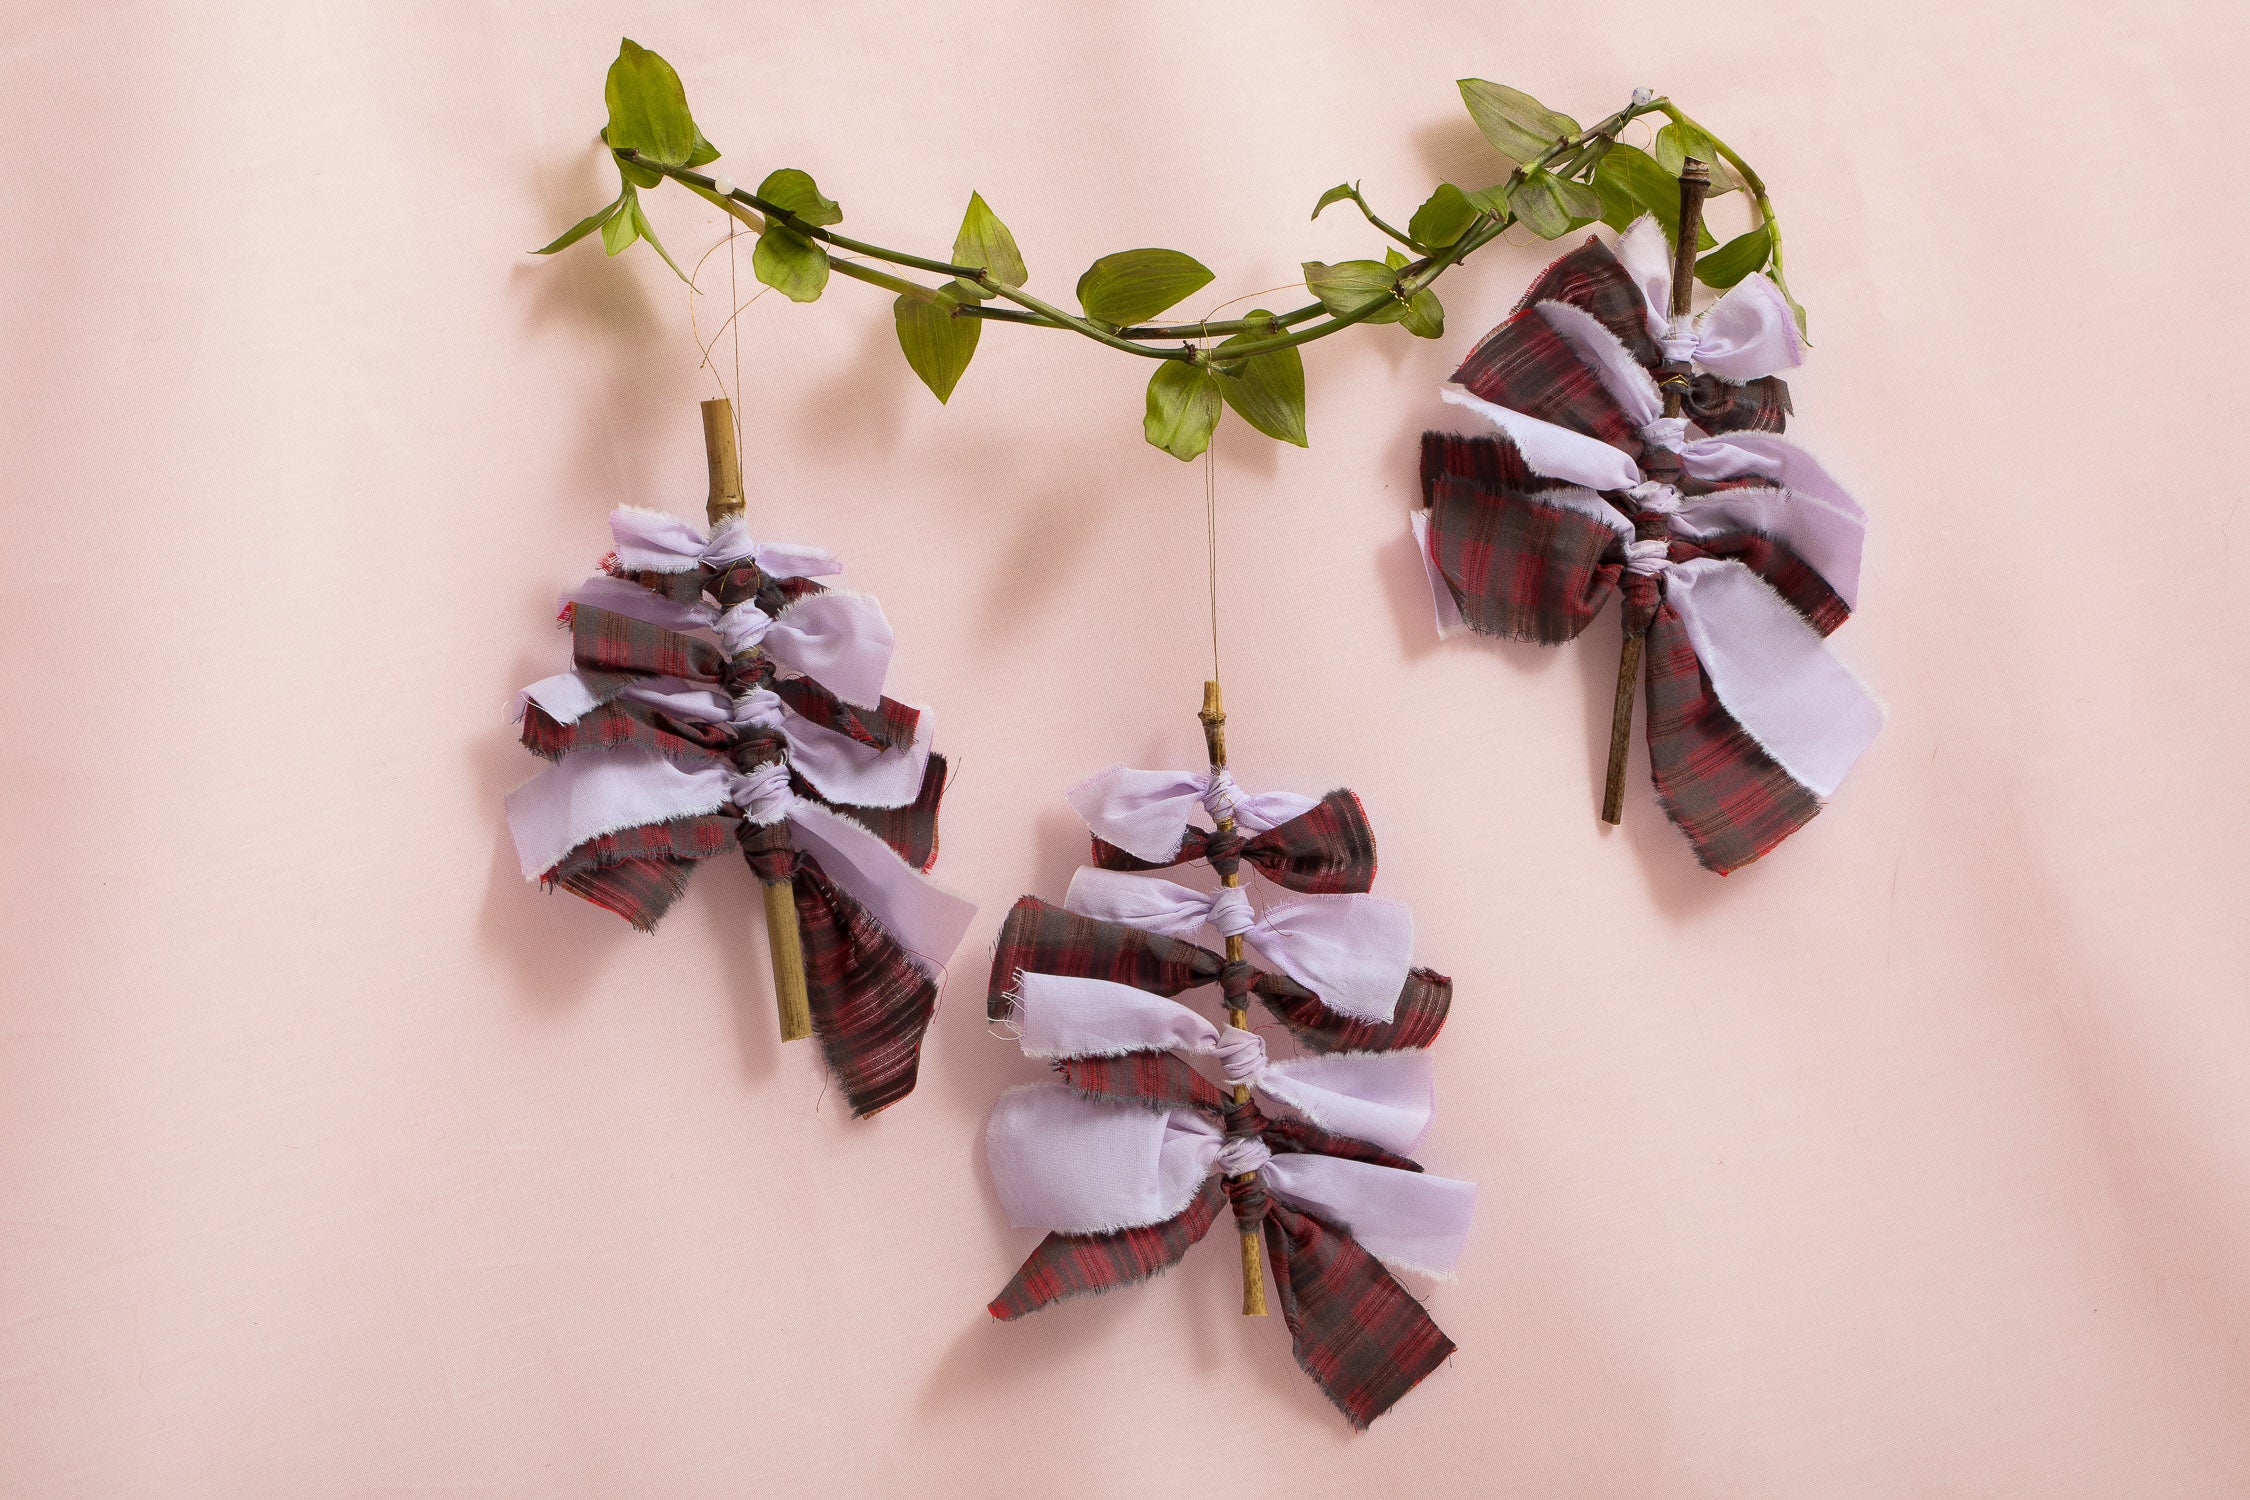 Christmas decorations: 3 Christmas Trees made from red tartan and lilac fabric offcuts tied on a bamboo stem, hanging from green micro ivy on a pink background. Sustainable decorations handmade in London